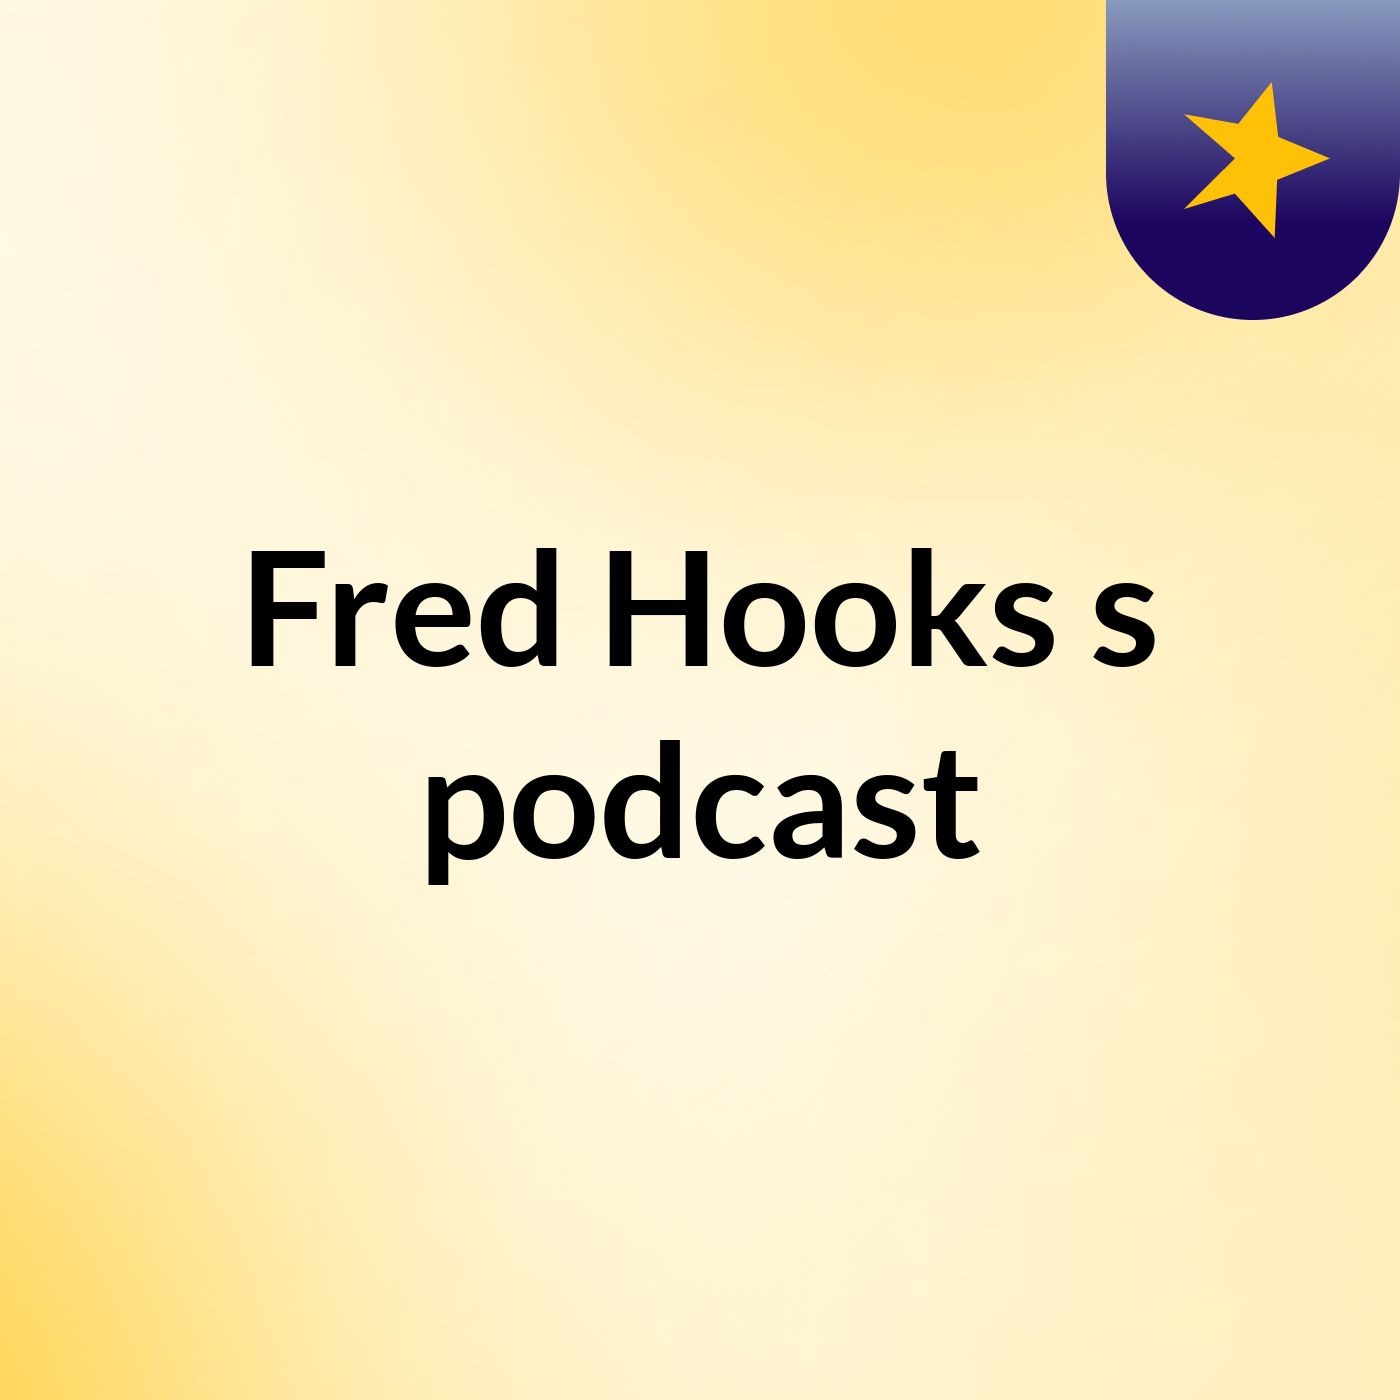 Episode 4 - Fred Hooks's Special Guest Tiara & Duke